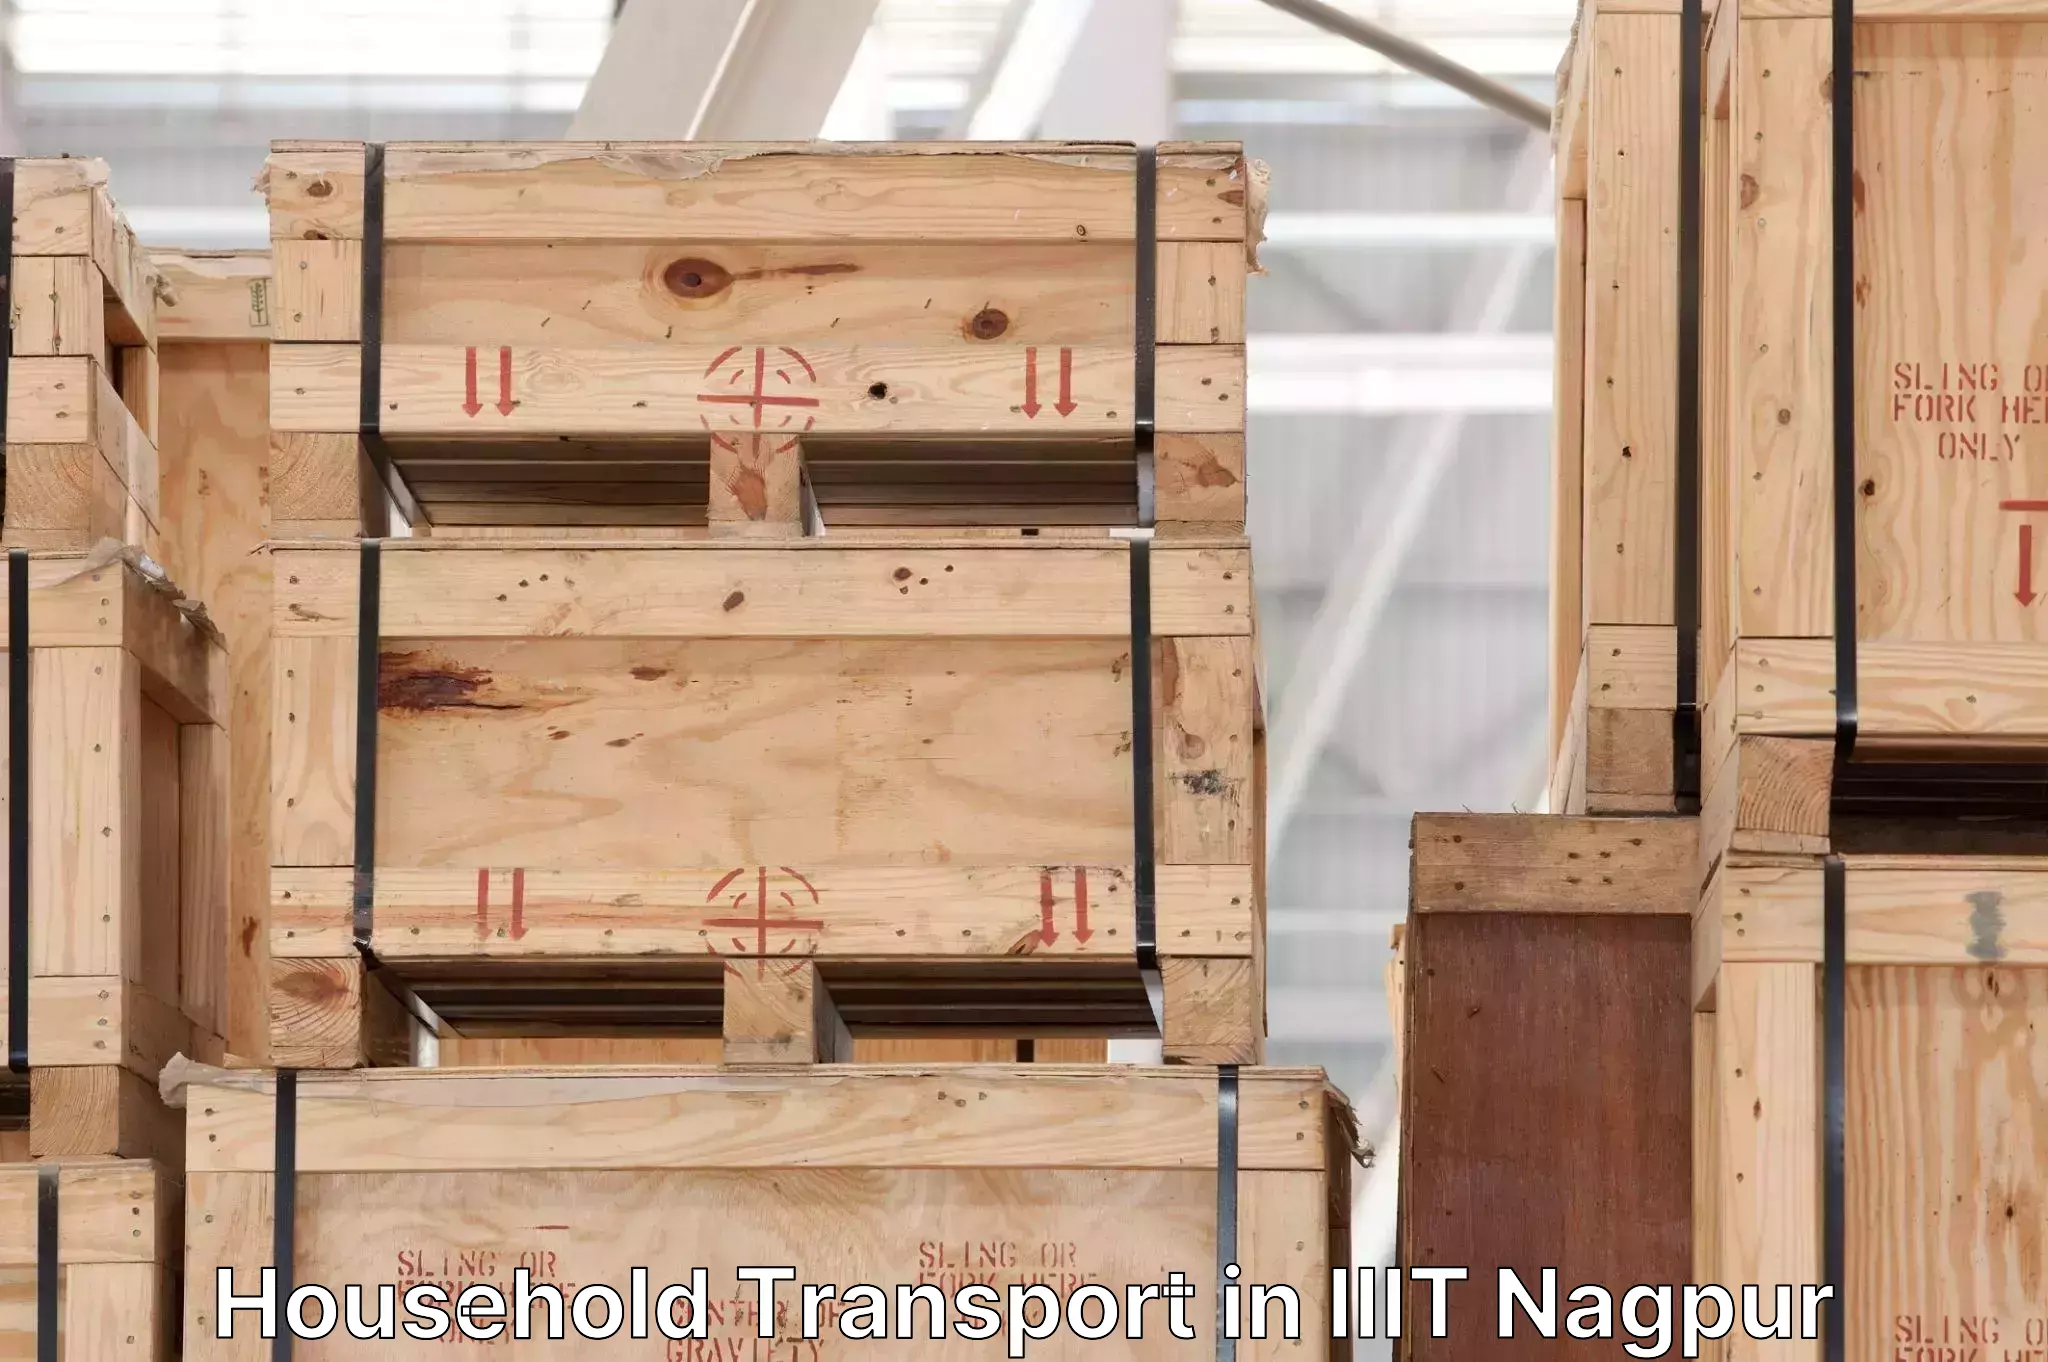 Cost-effective moving options in IIIT Nagpur